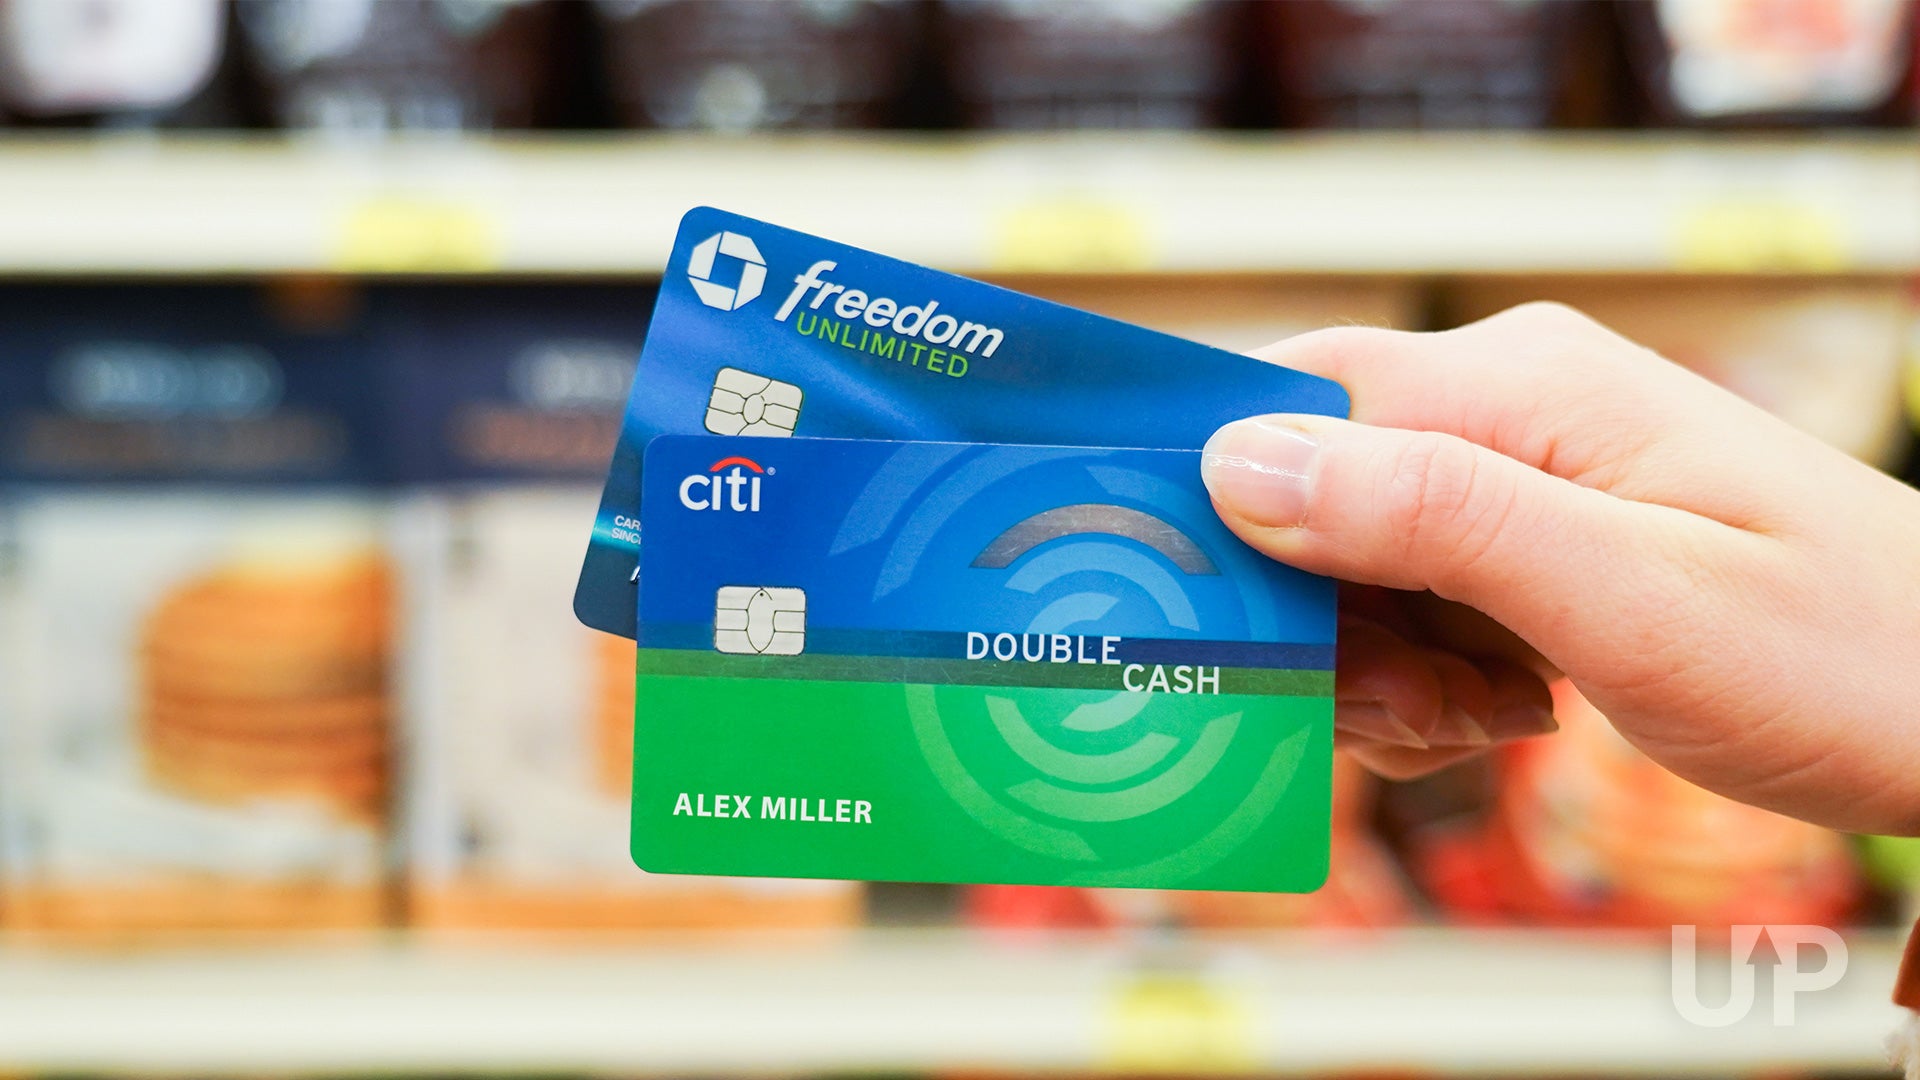 Freedom Unlimited and Citi Double Cash Supermarket 3 Upgraded Points LLC